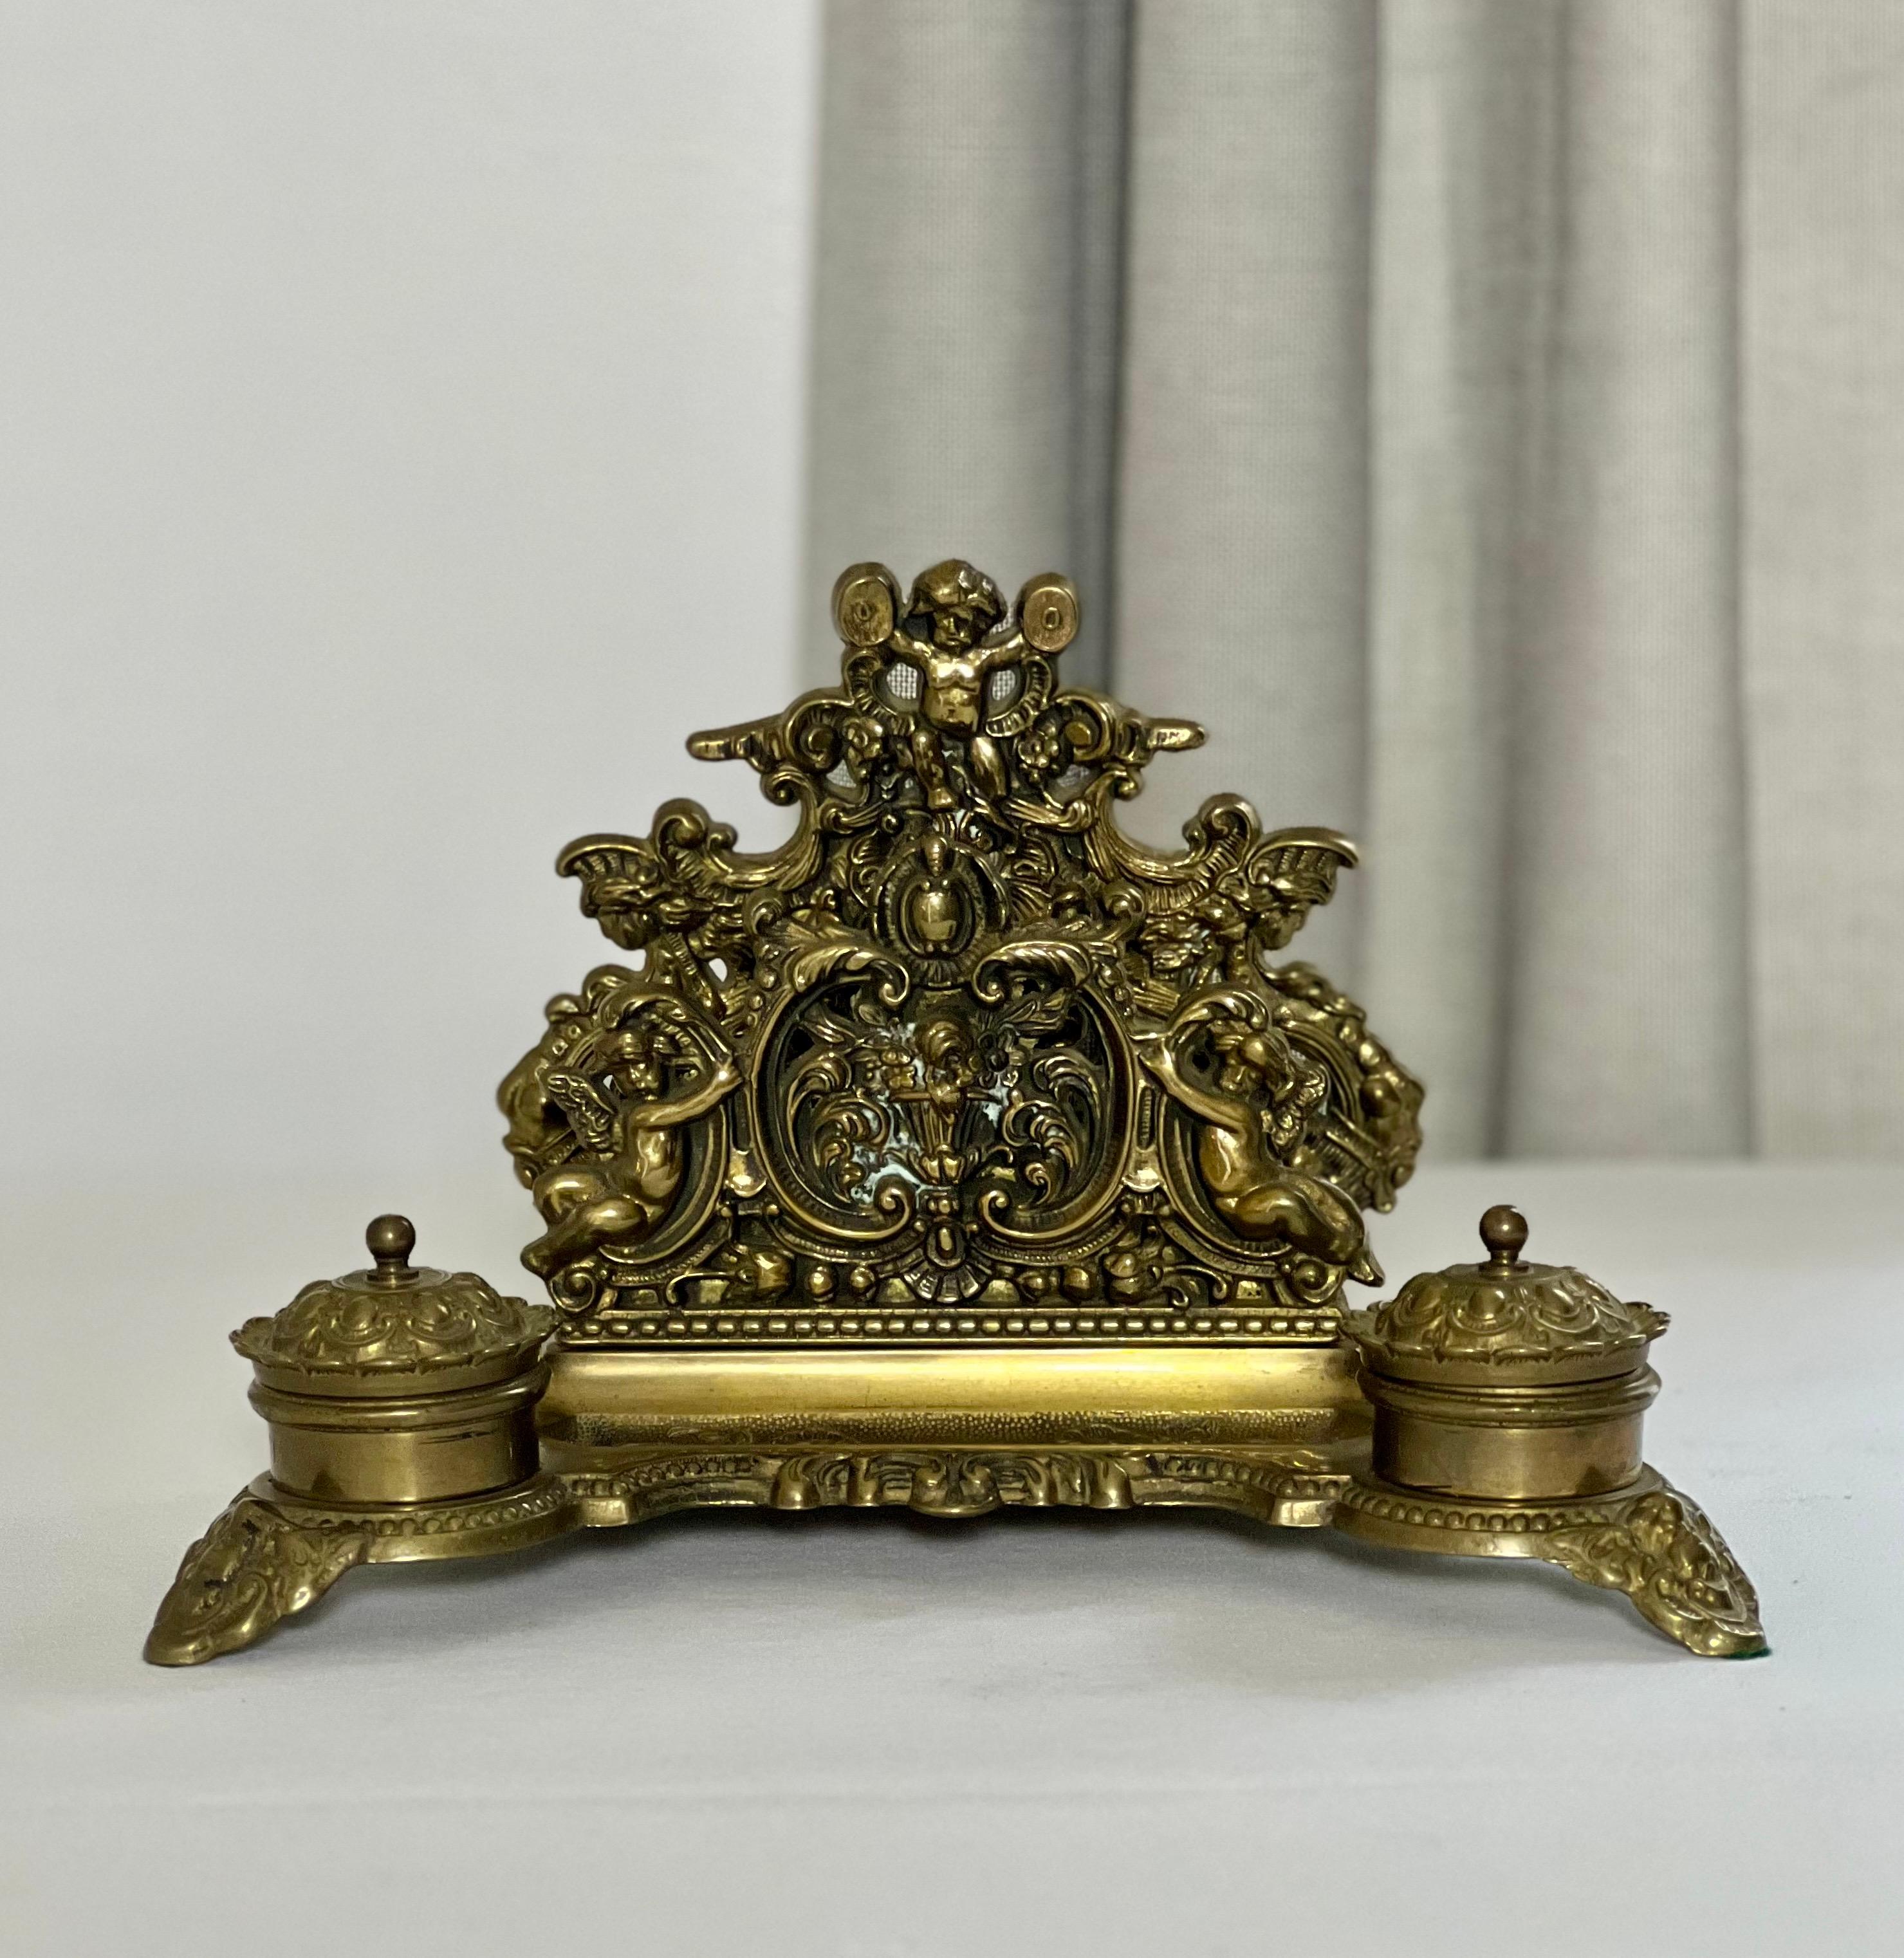 Baroque style solid brass double inkwell set with letter holder, c. 1900-1910.

A gorgeous desktop accessory ornately adorned with cherubs, flowers and scrolling acanthus leaves.  Inkwells with hinged lids and original ceramic inserts sit on either